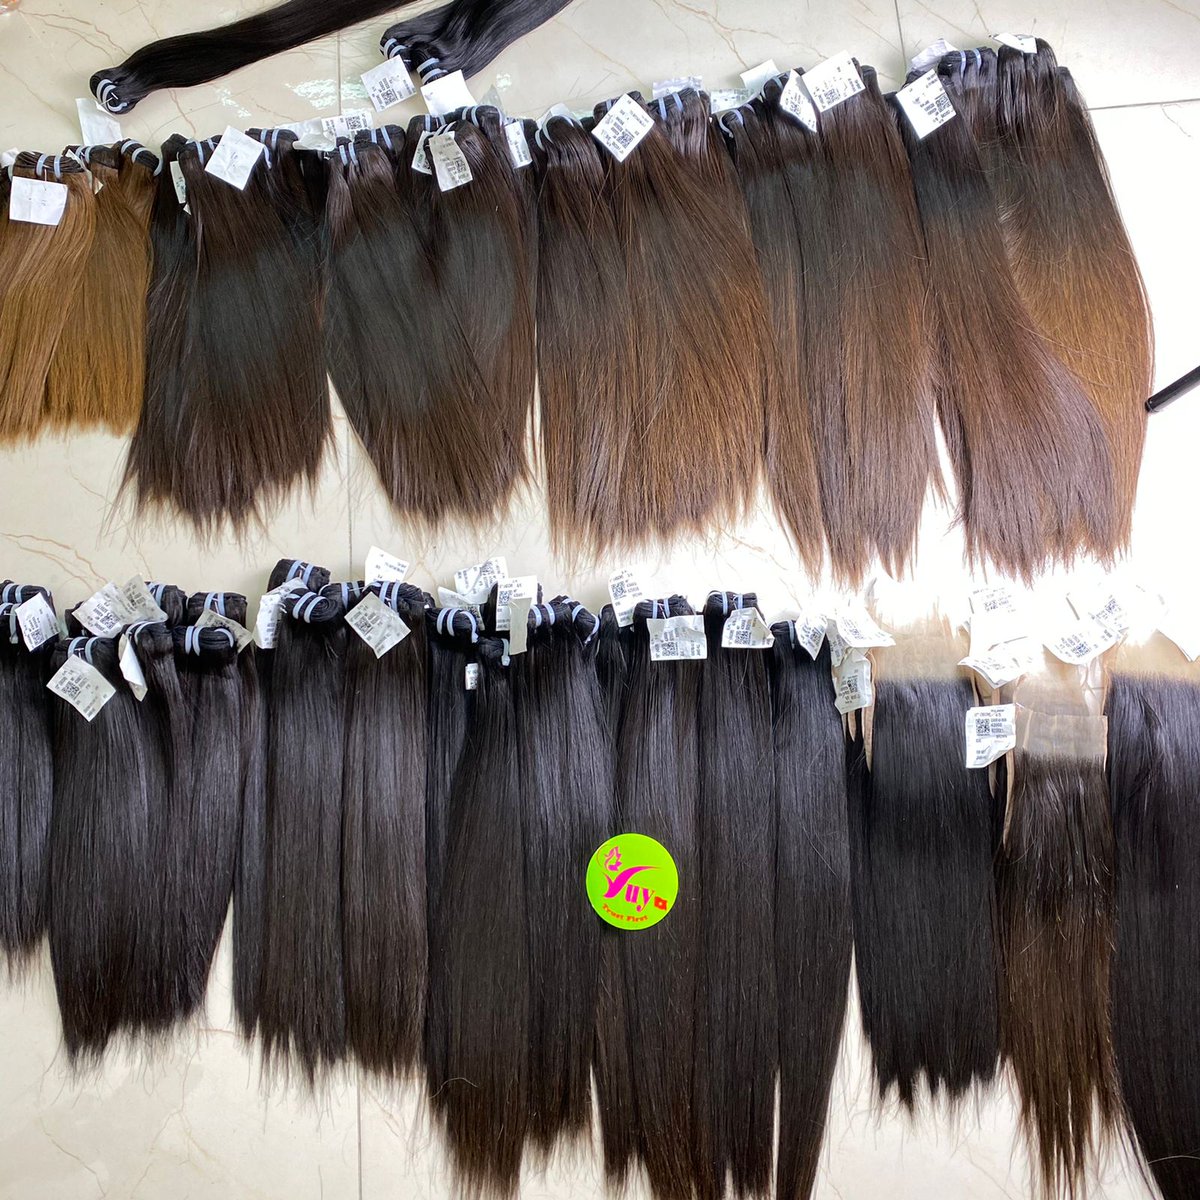 Nice Bone Straight With Single Donor From VUY VietNam 🥰Contact With Me On Whatsapp +84396092128 #RawHairExtensions #NaturalHairExtensions #RawVirginHair #UnprocessedHair #RawHairVendor #HairExtensions #HairWeaves #RawIndianHair #VirginHairExtensions #RealHairExtensions